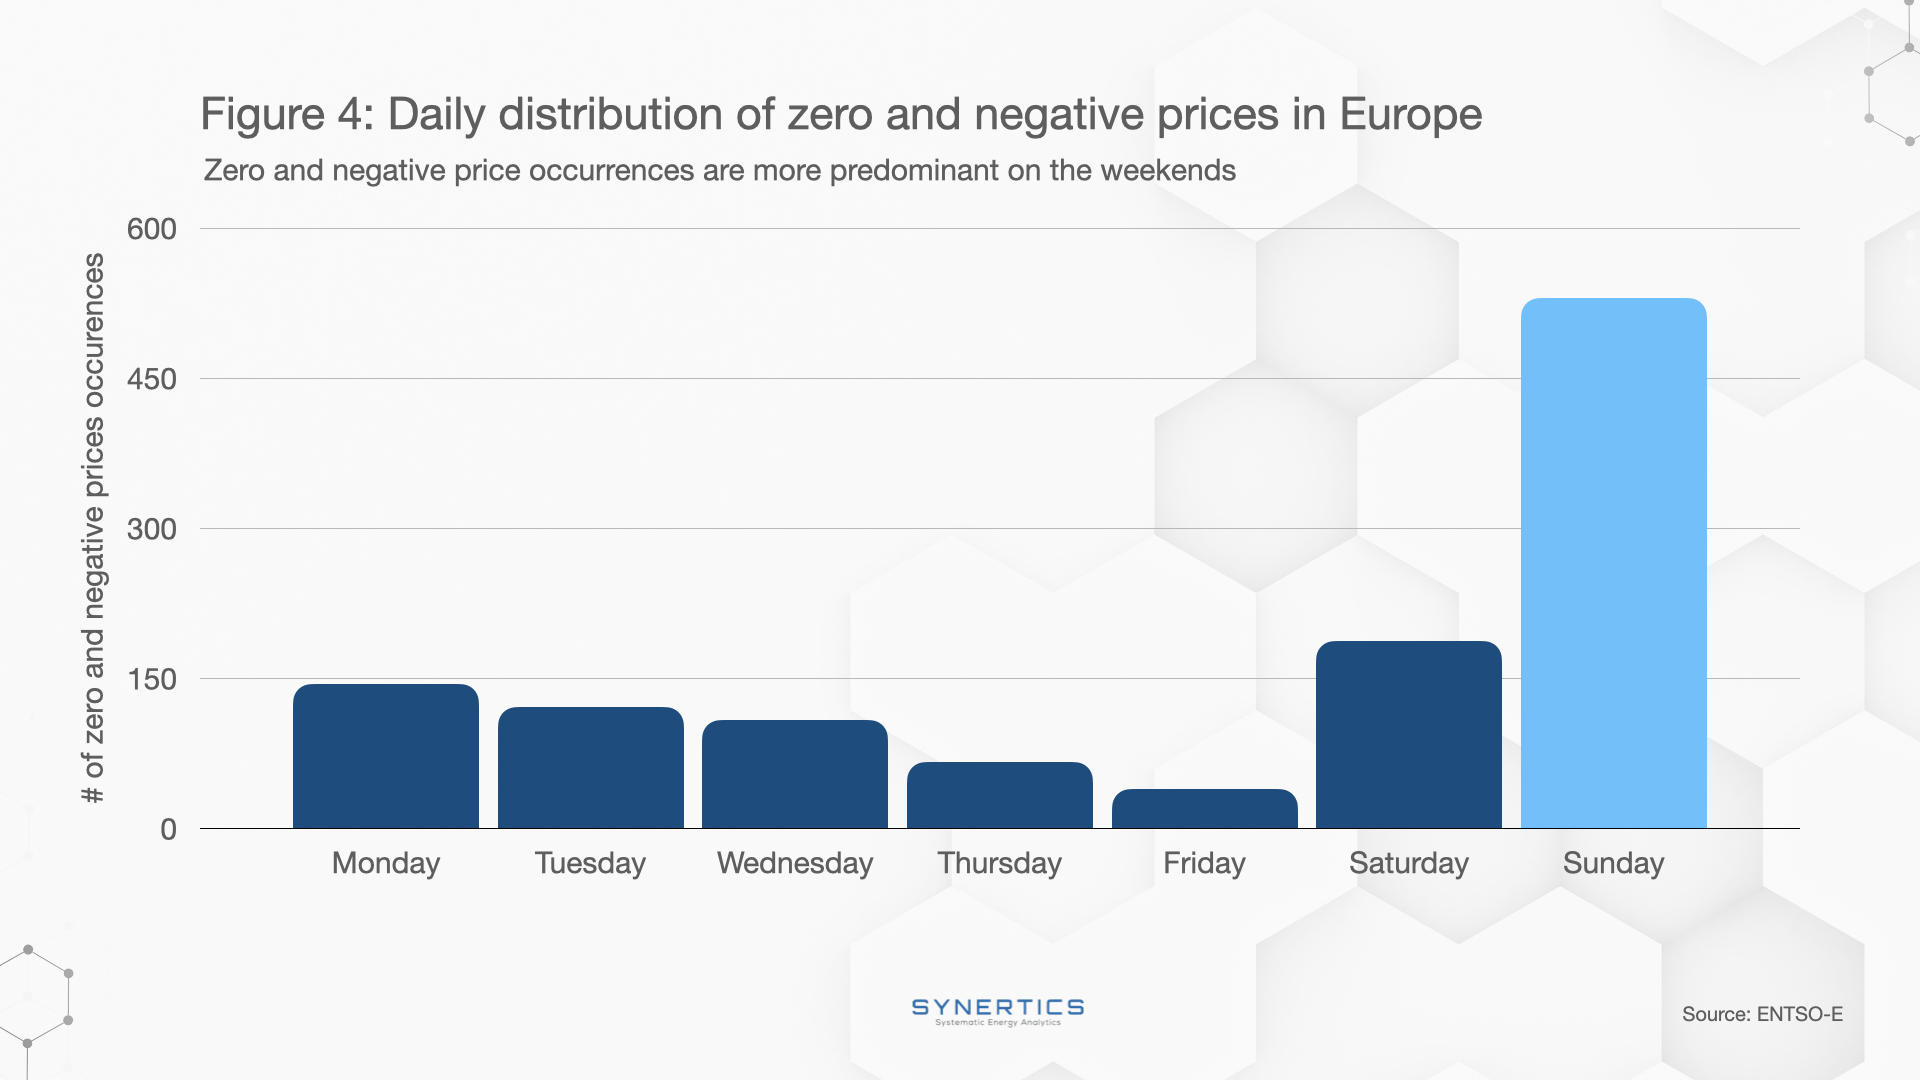 Daily distribution of zero and negative prices in Europe